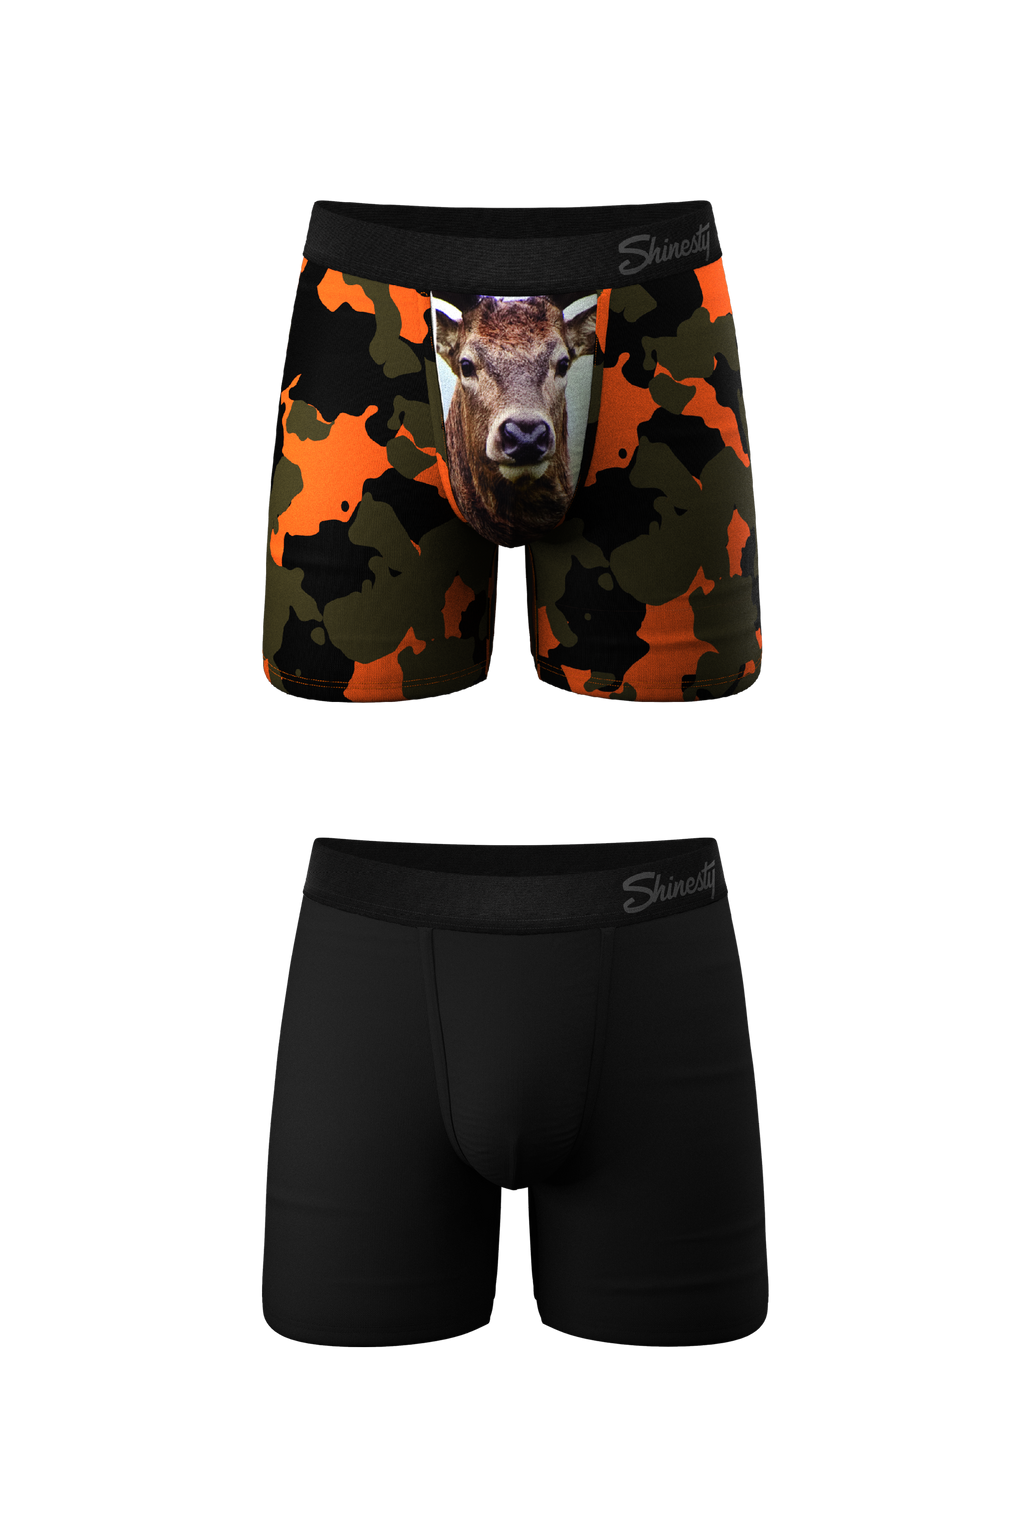 Boxer briefs with unique animal faces, part of My Name is Buck | Ball Hammock® 2 Pack.